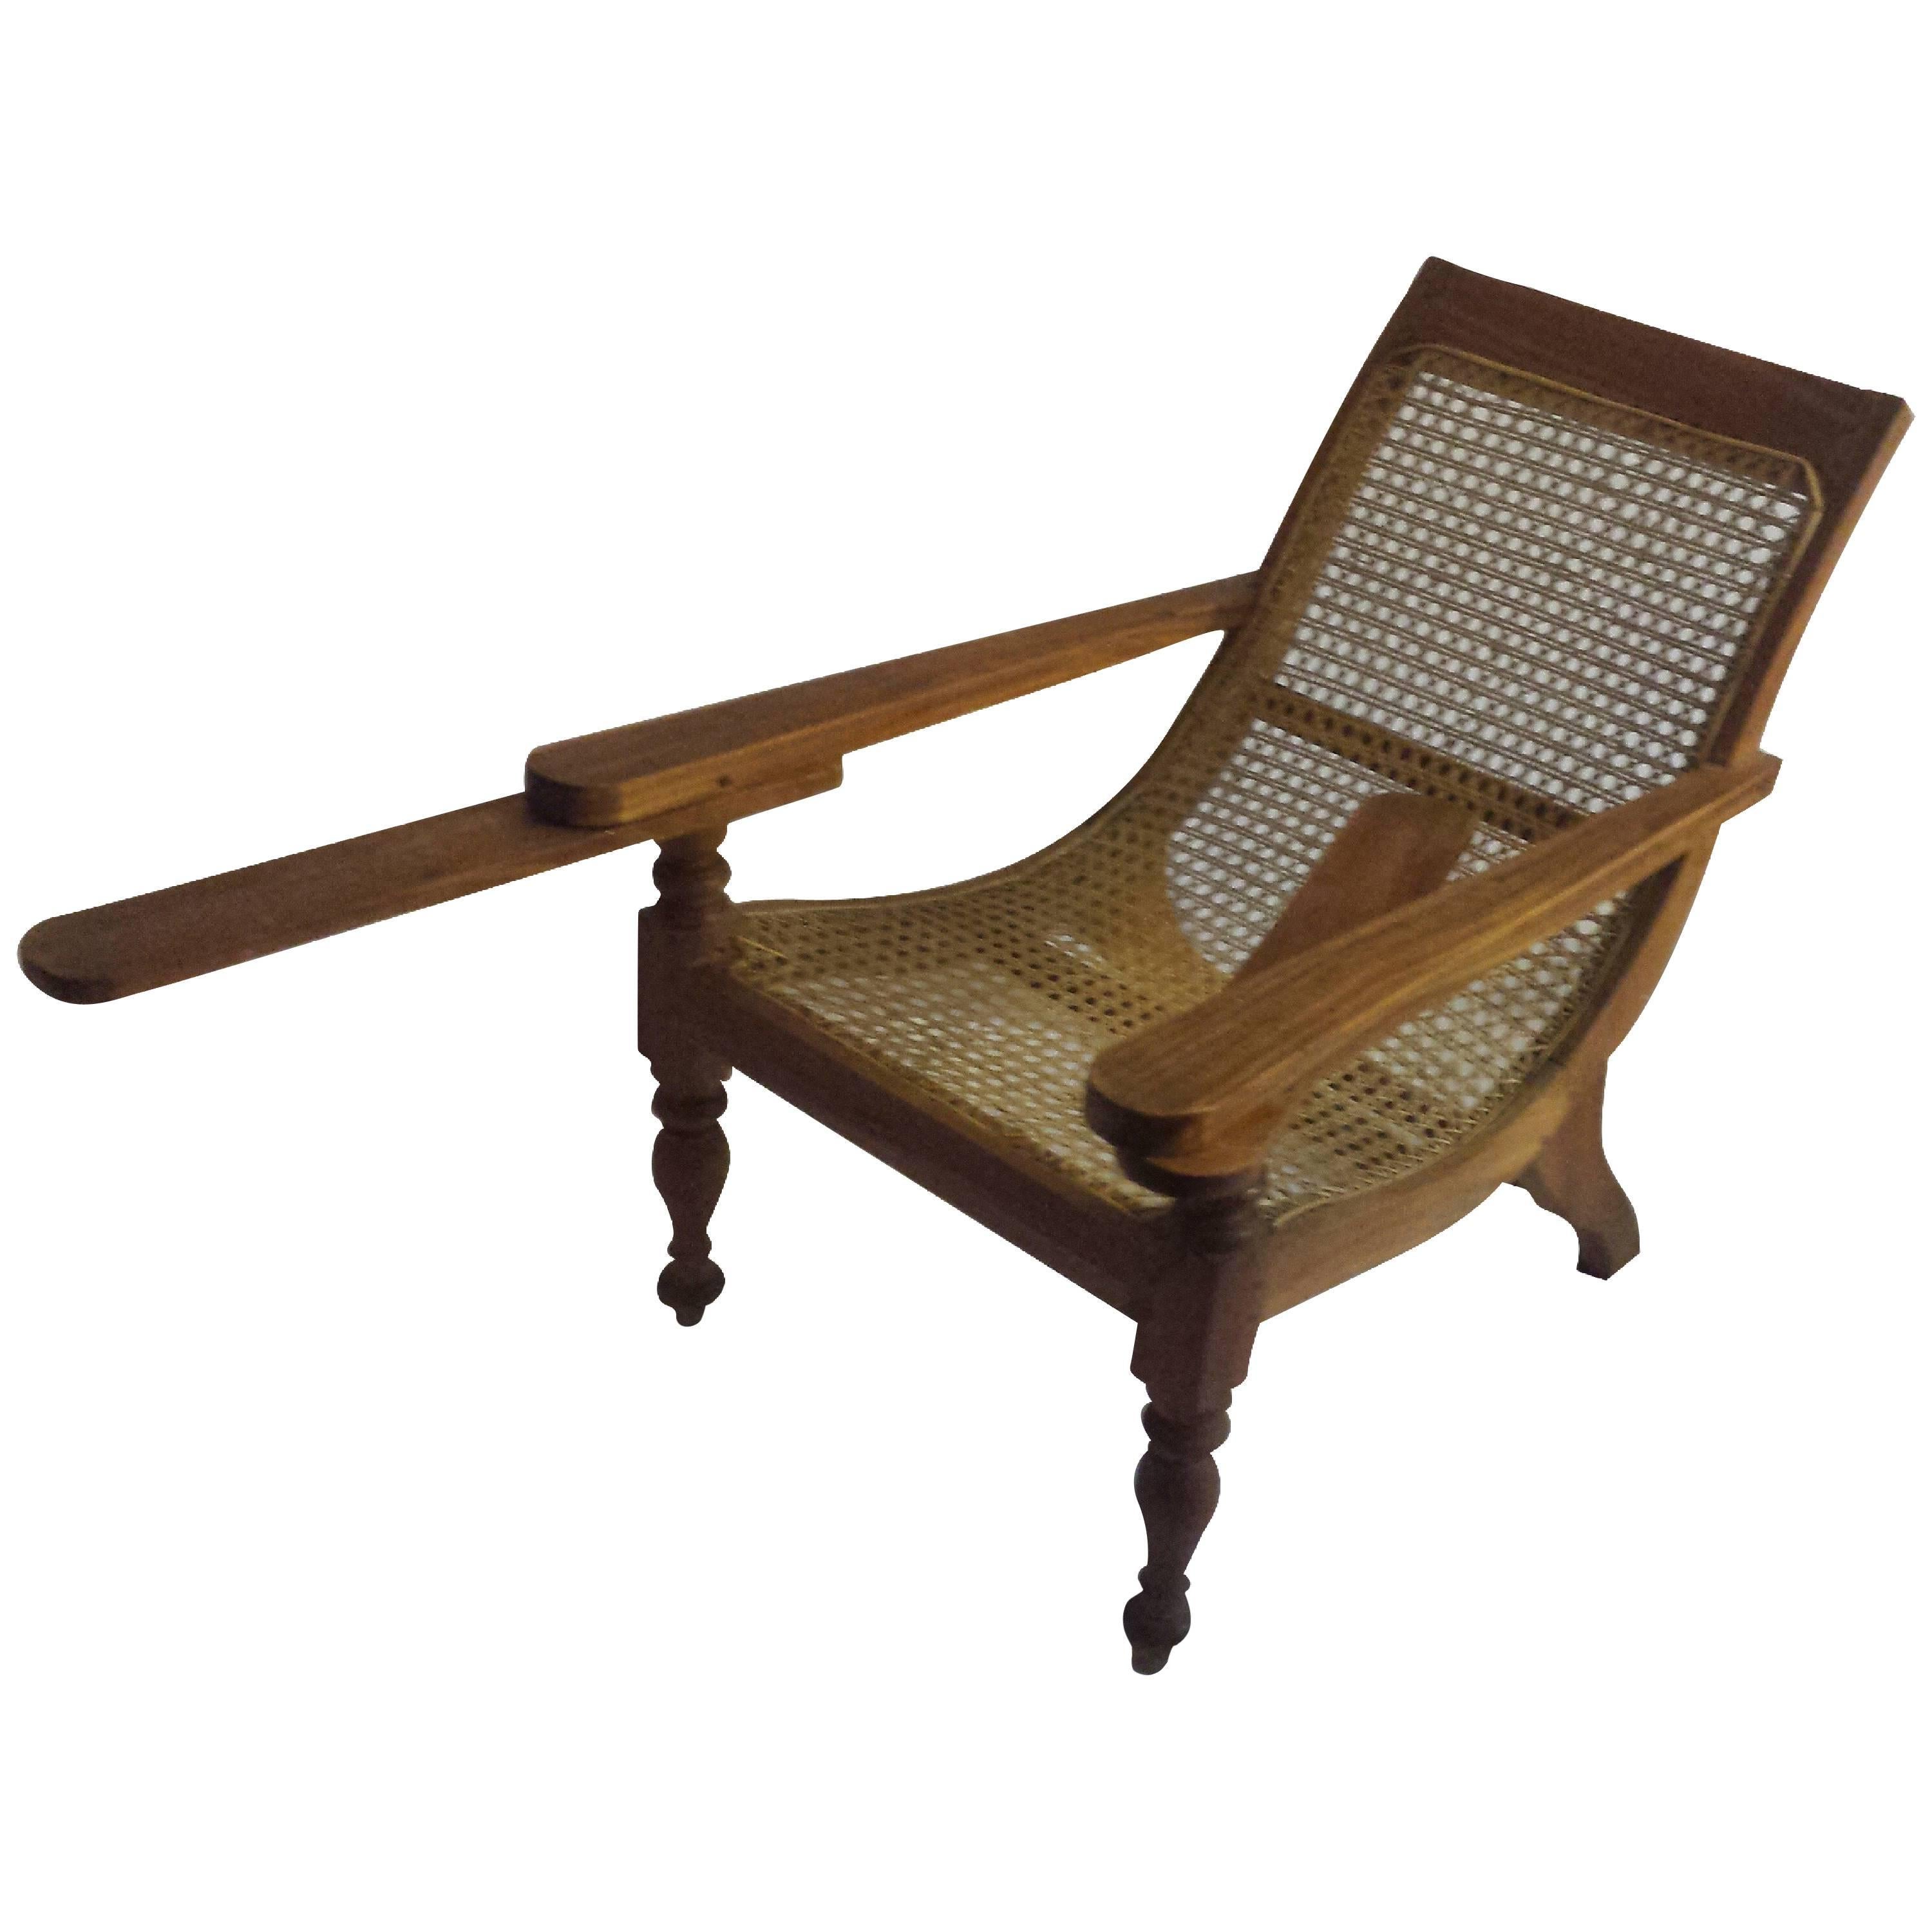 British Colonial Ceylonese Child's Planters Chair in Satinwood & Caning, c. 1900